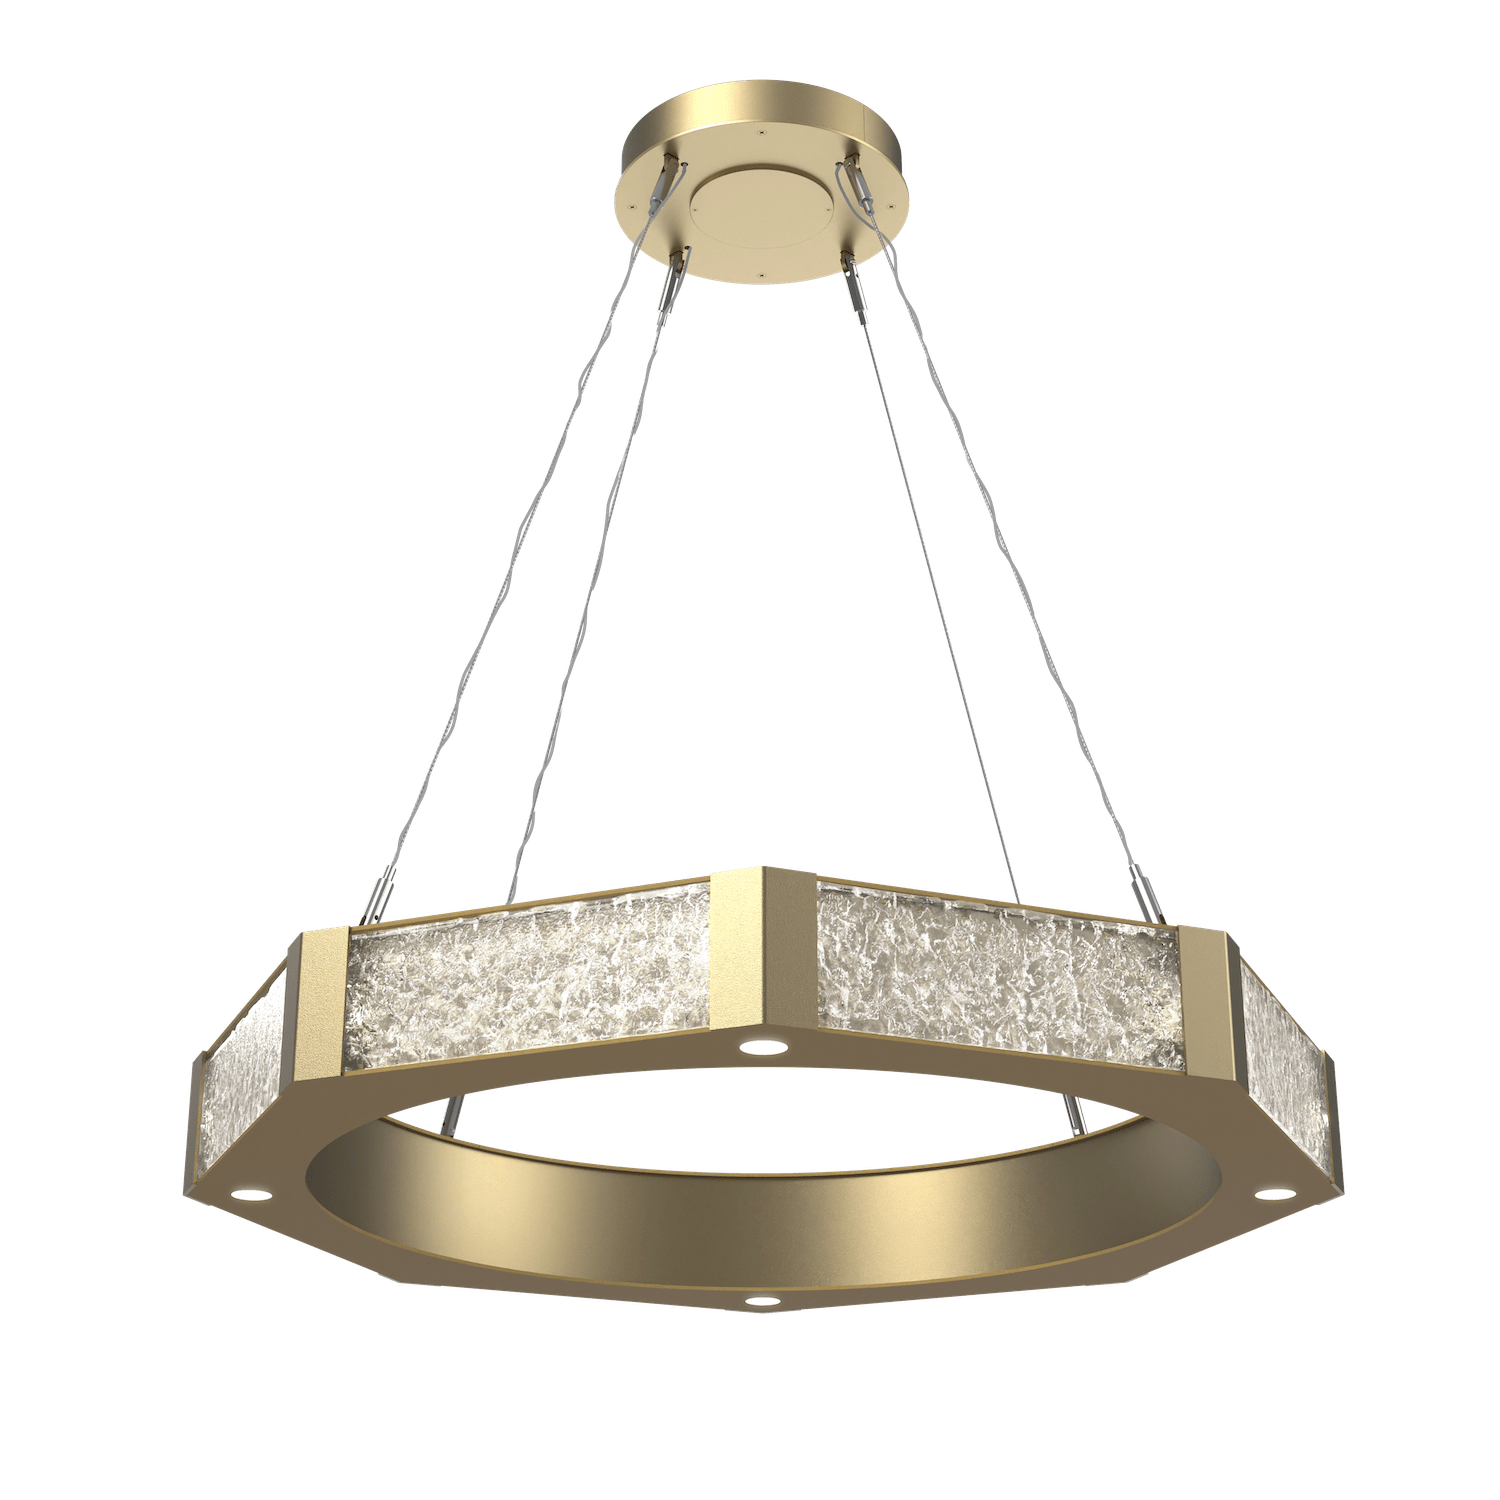 CHB0061-36-GB-GC-Hammerton-Studio-Glacier-36-inch-ring-chandelier-with-gilded-brass-finish-and-clear-blown-glass-with-geo-clear-cast-glass-diffusers-and-LED-lamping